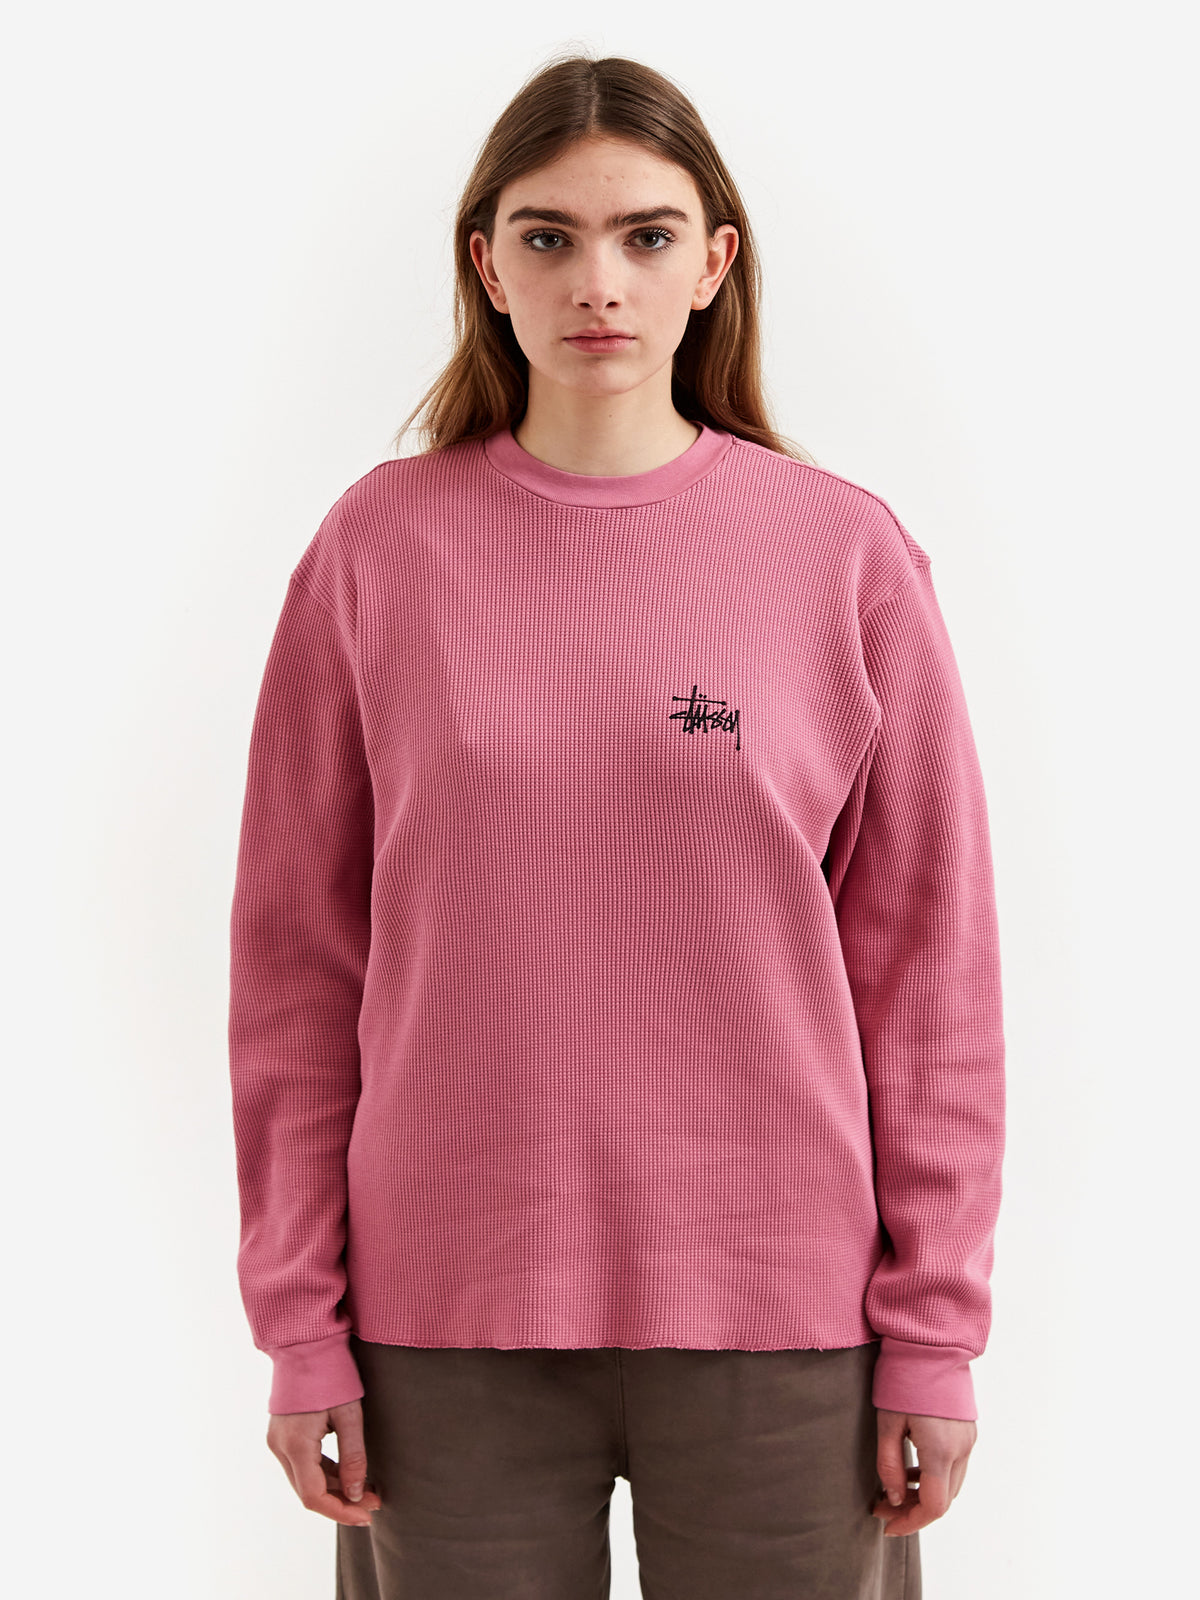 The Stussy O'Dyed LS Thermal - Magenta Stussy is an excellent